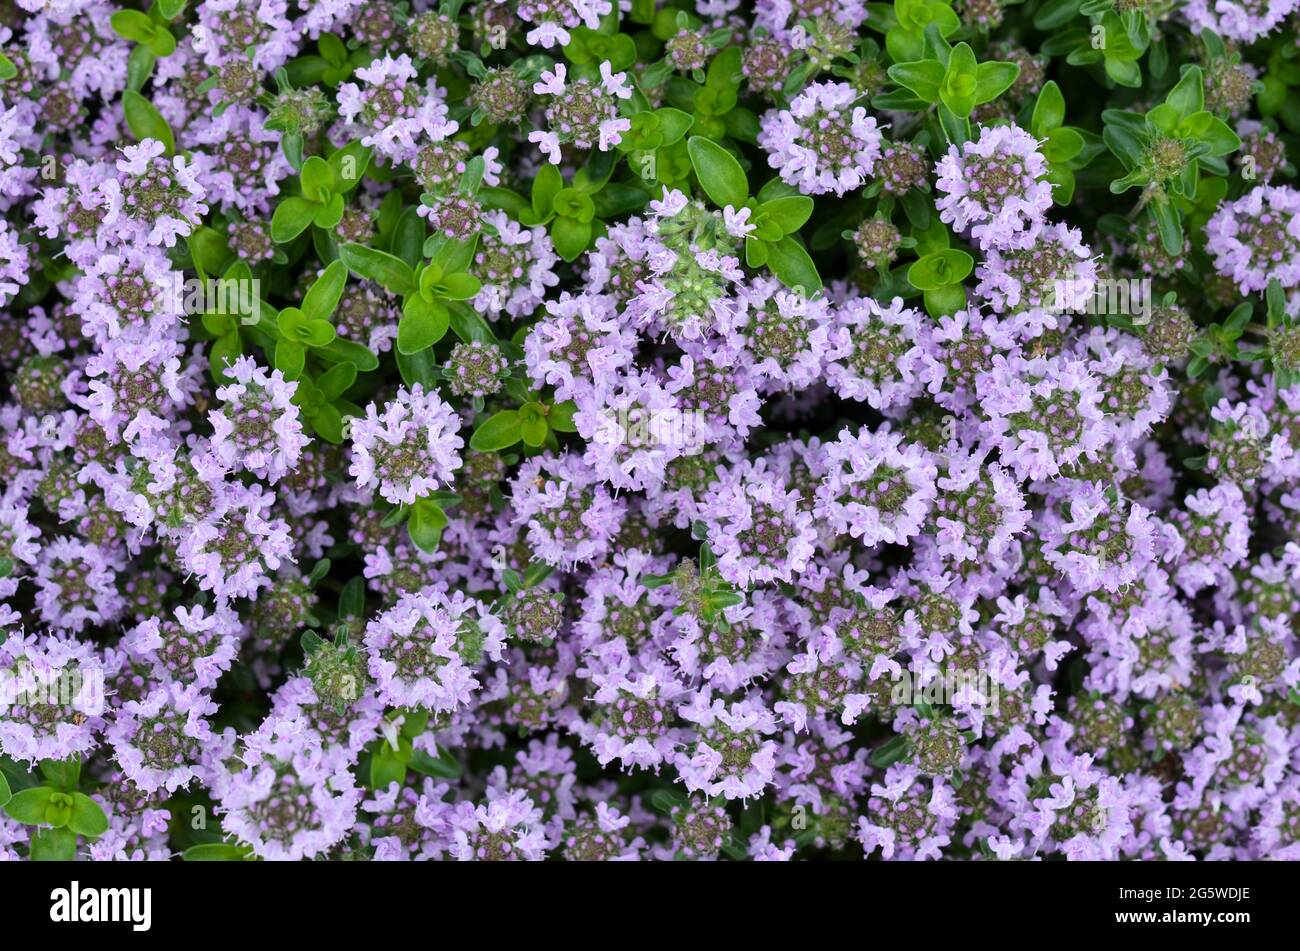 Flowering Thymus serpyllum or wild thyme - aromatic perennial herb. Can be used as a floral background. Stock Photo